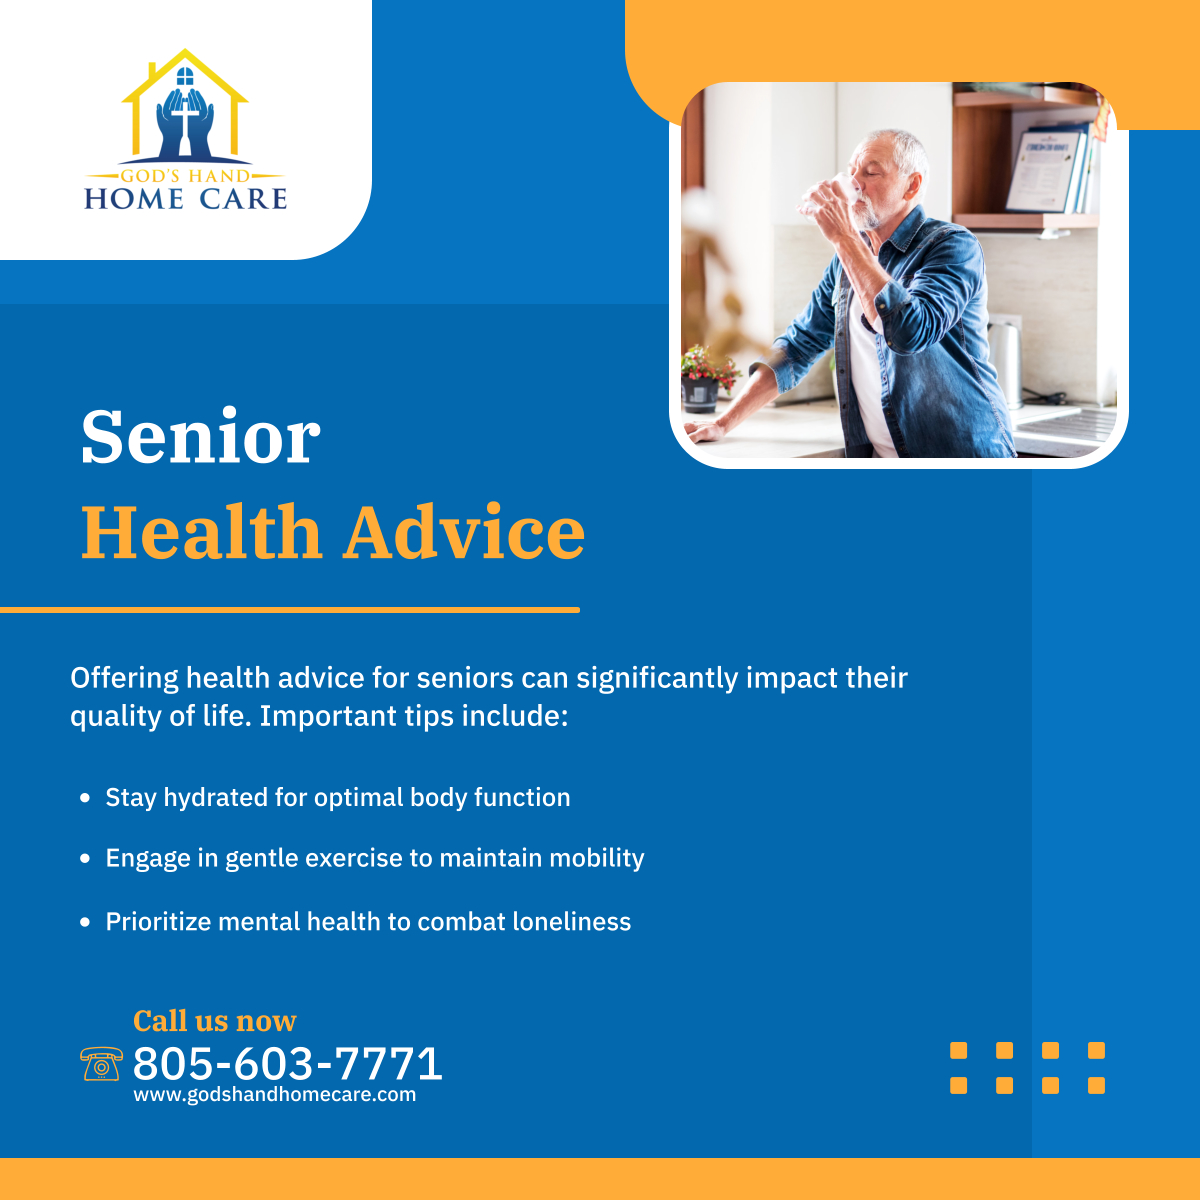 Enhance the quality of life for your senior loved ones with these health tips. Small changes can make a big difference in their daily lives. 

#OxnardCA #HomeCare #SeniorWellness